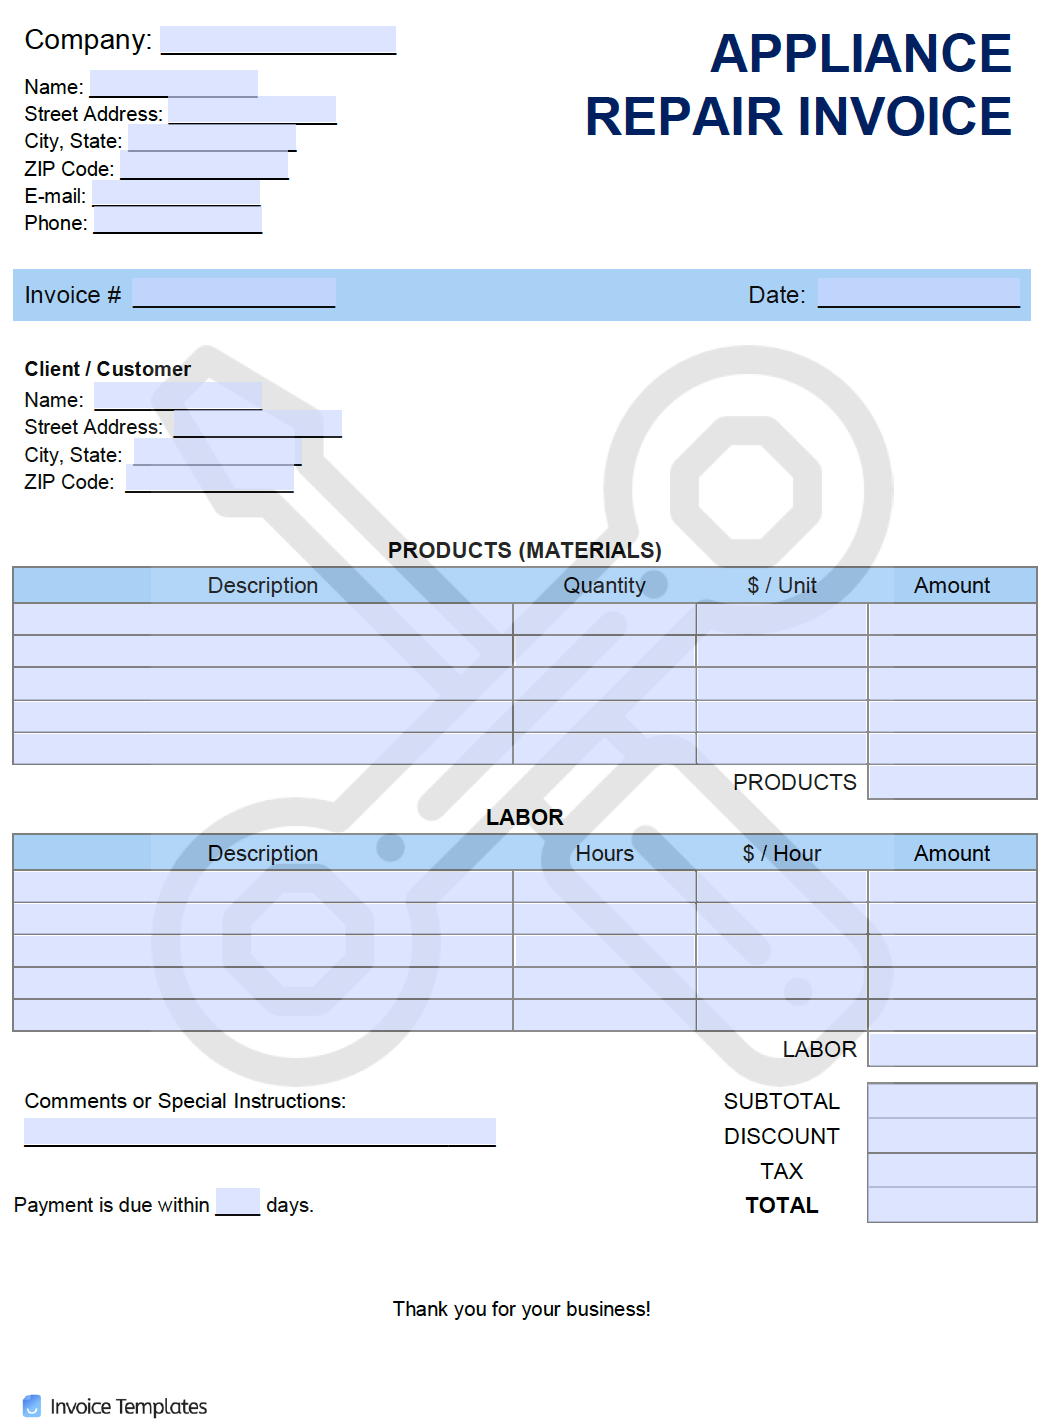 Free Appliance Repair Invoice Template Pdf Word Excel